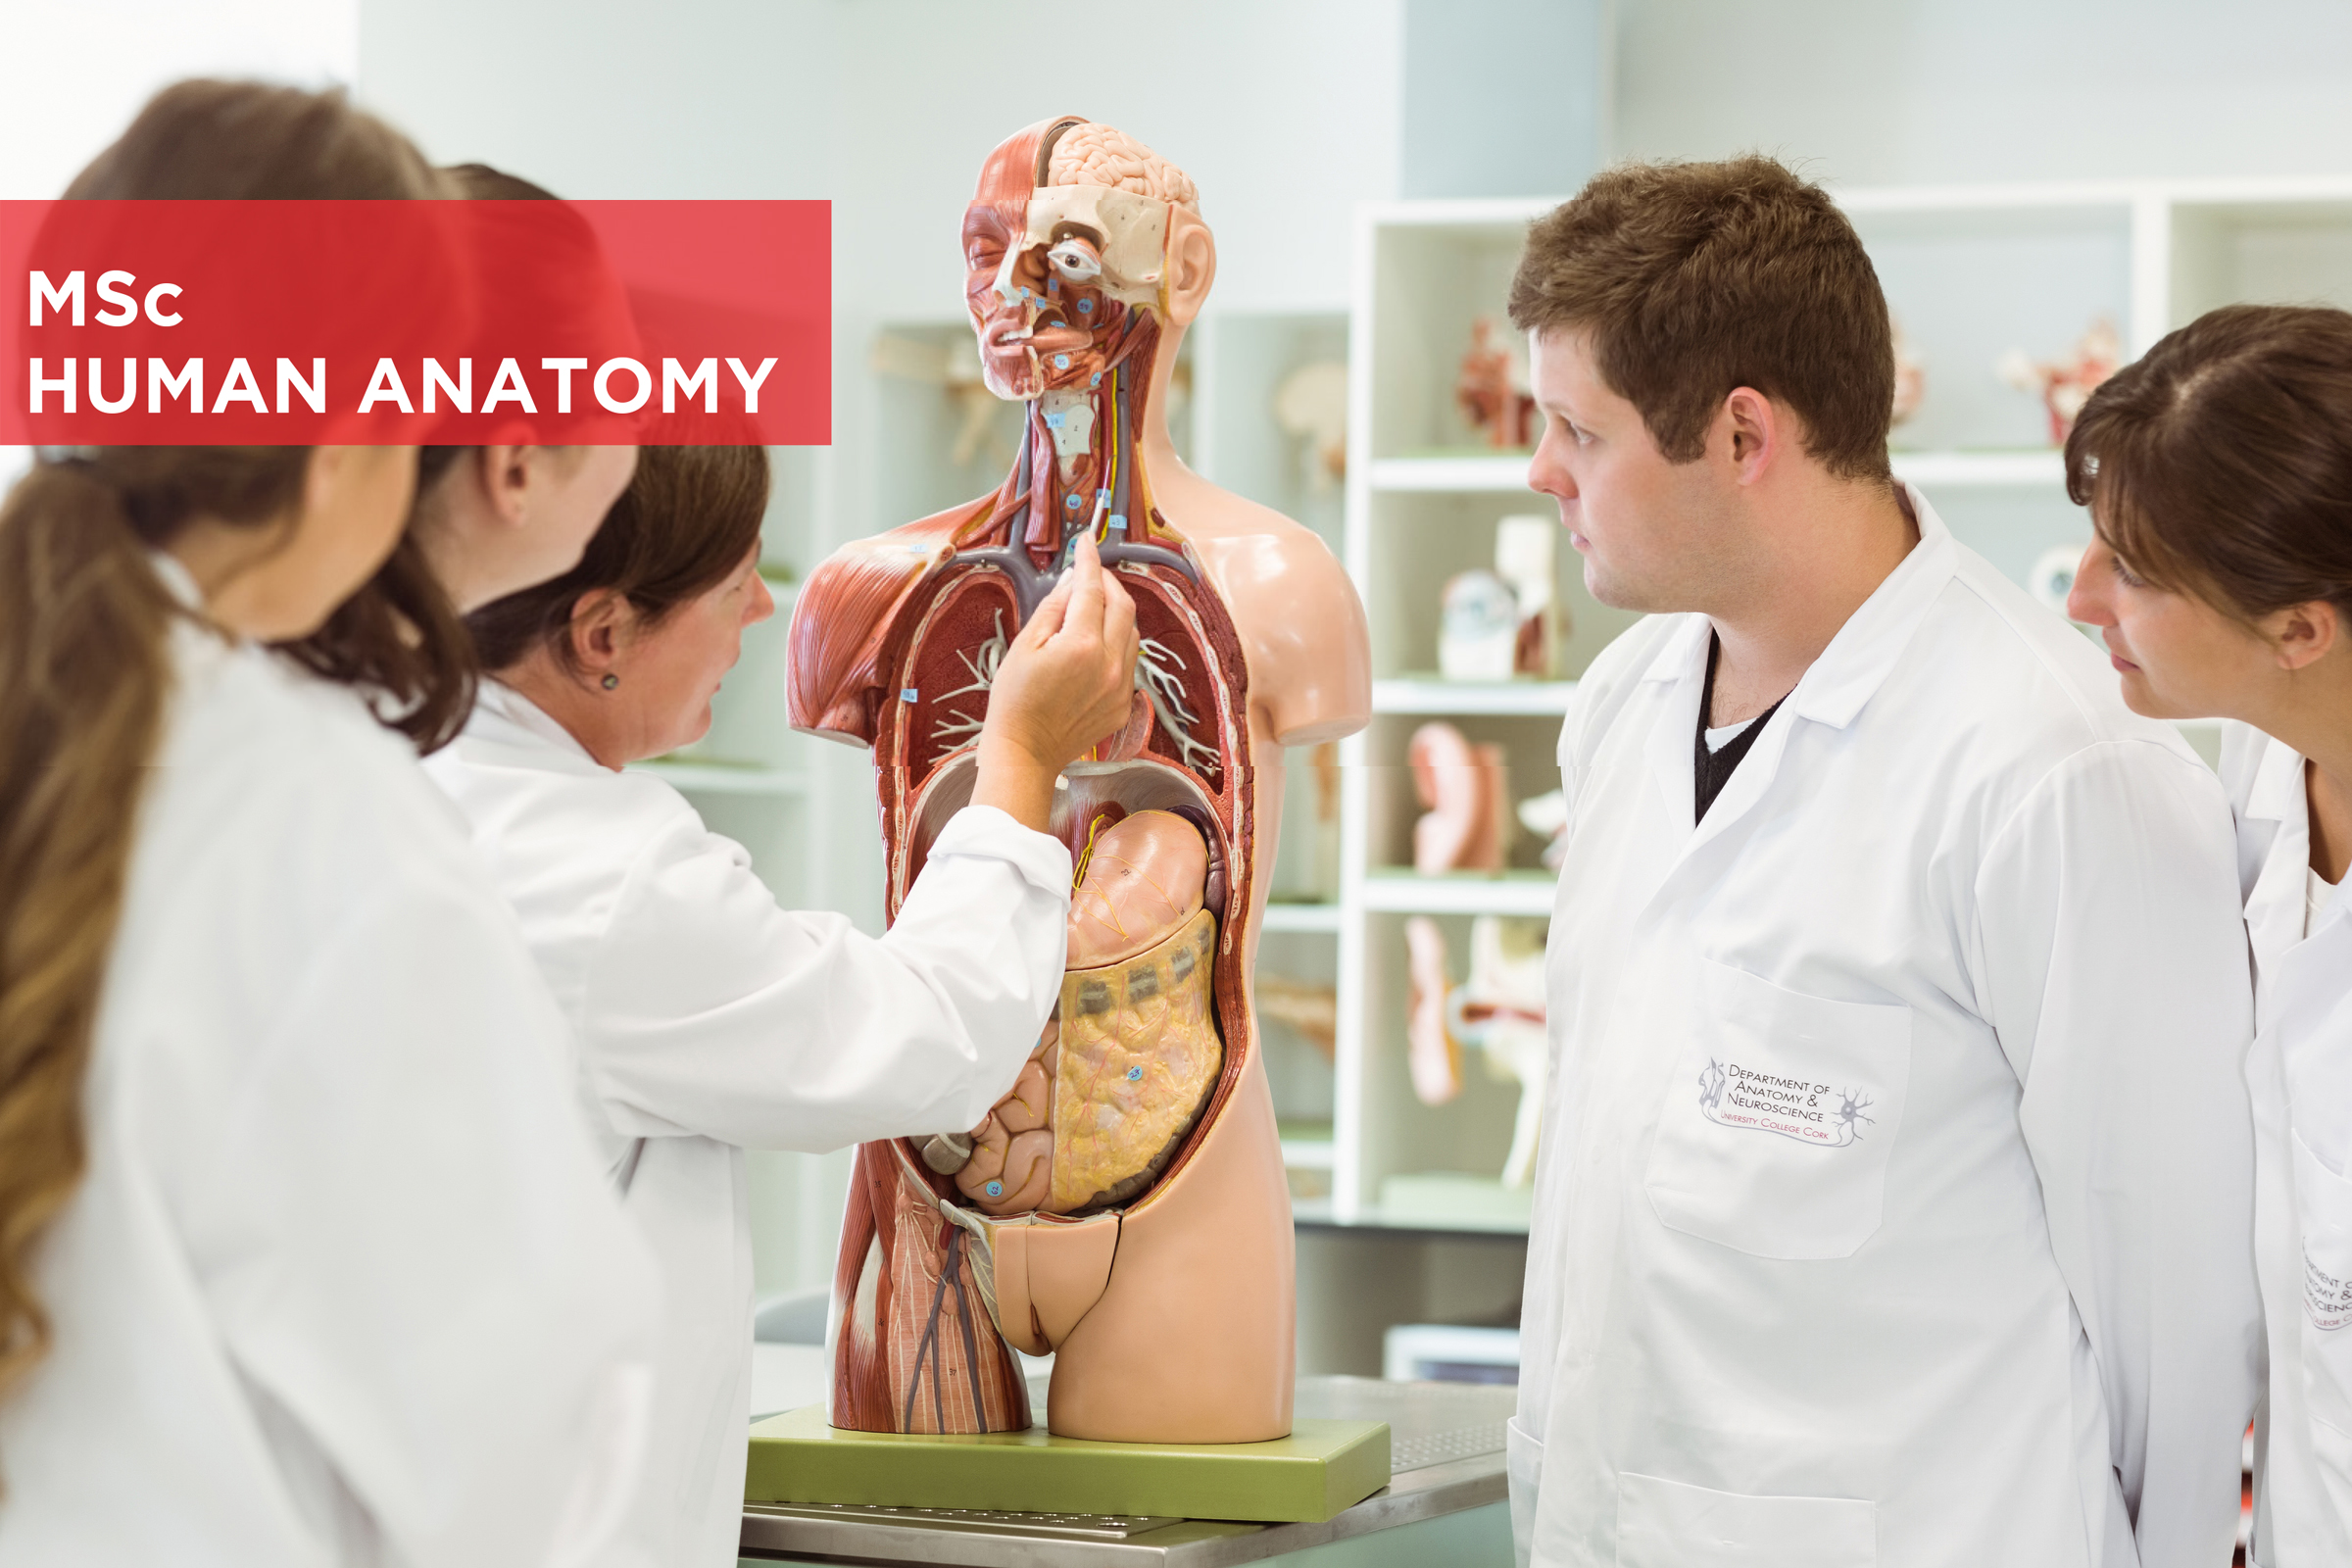 MSc Human Anatomy course 2020 Now accepting applications